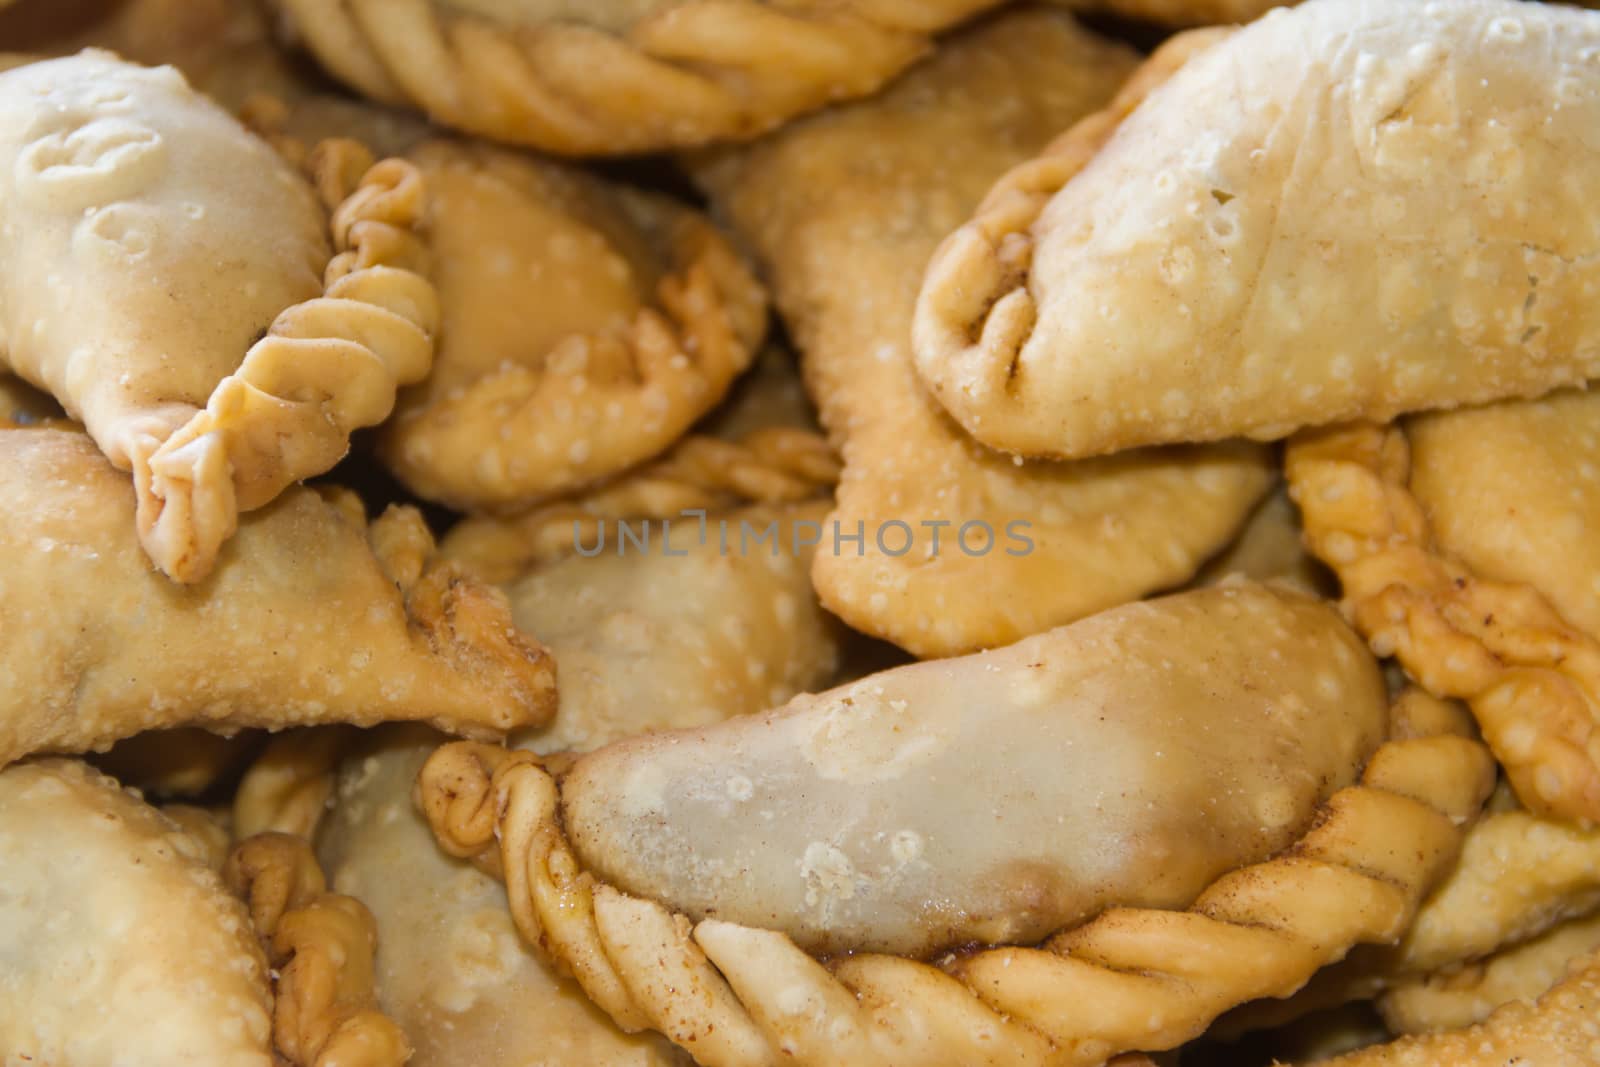 fried empanadas typical of the Argentine countryside gastronomy